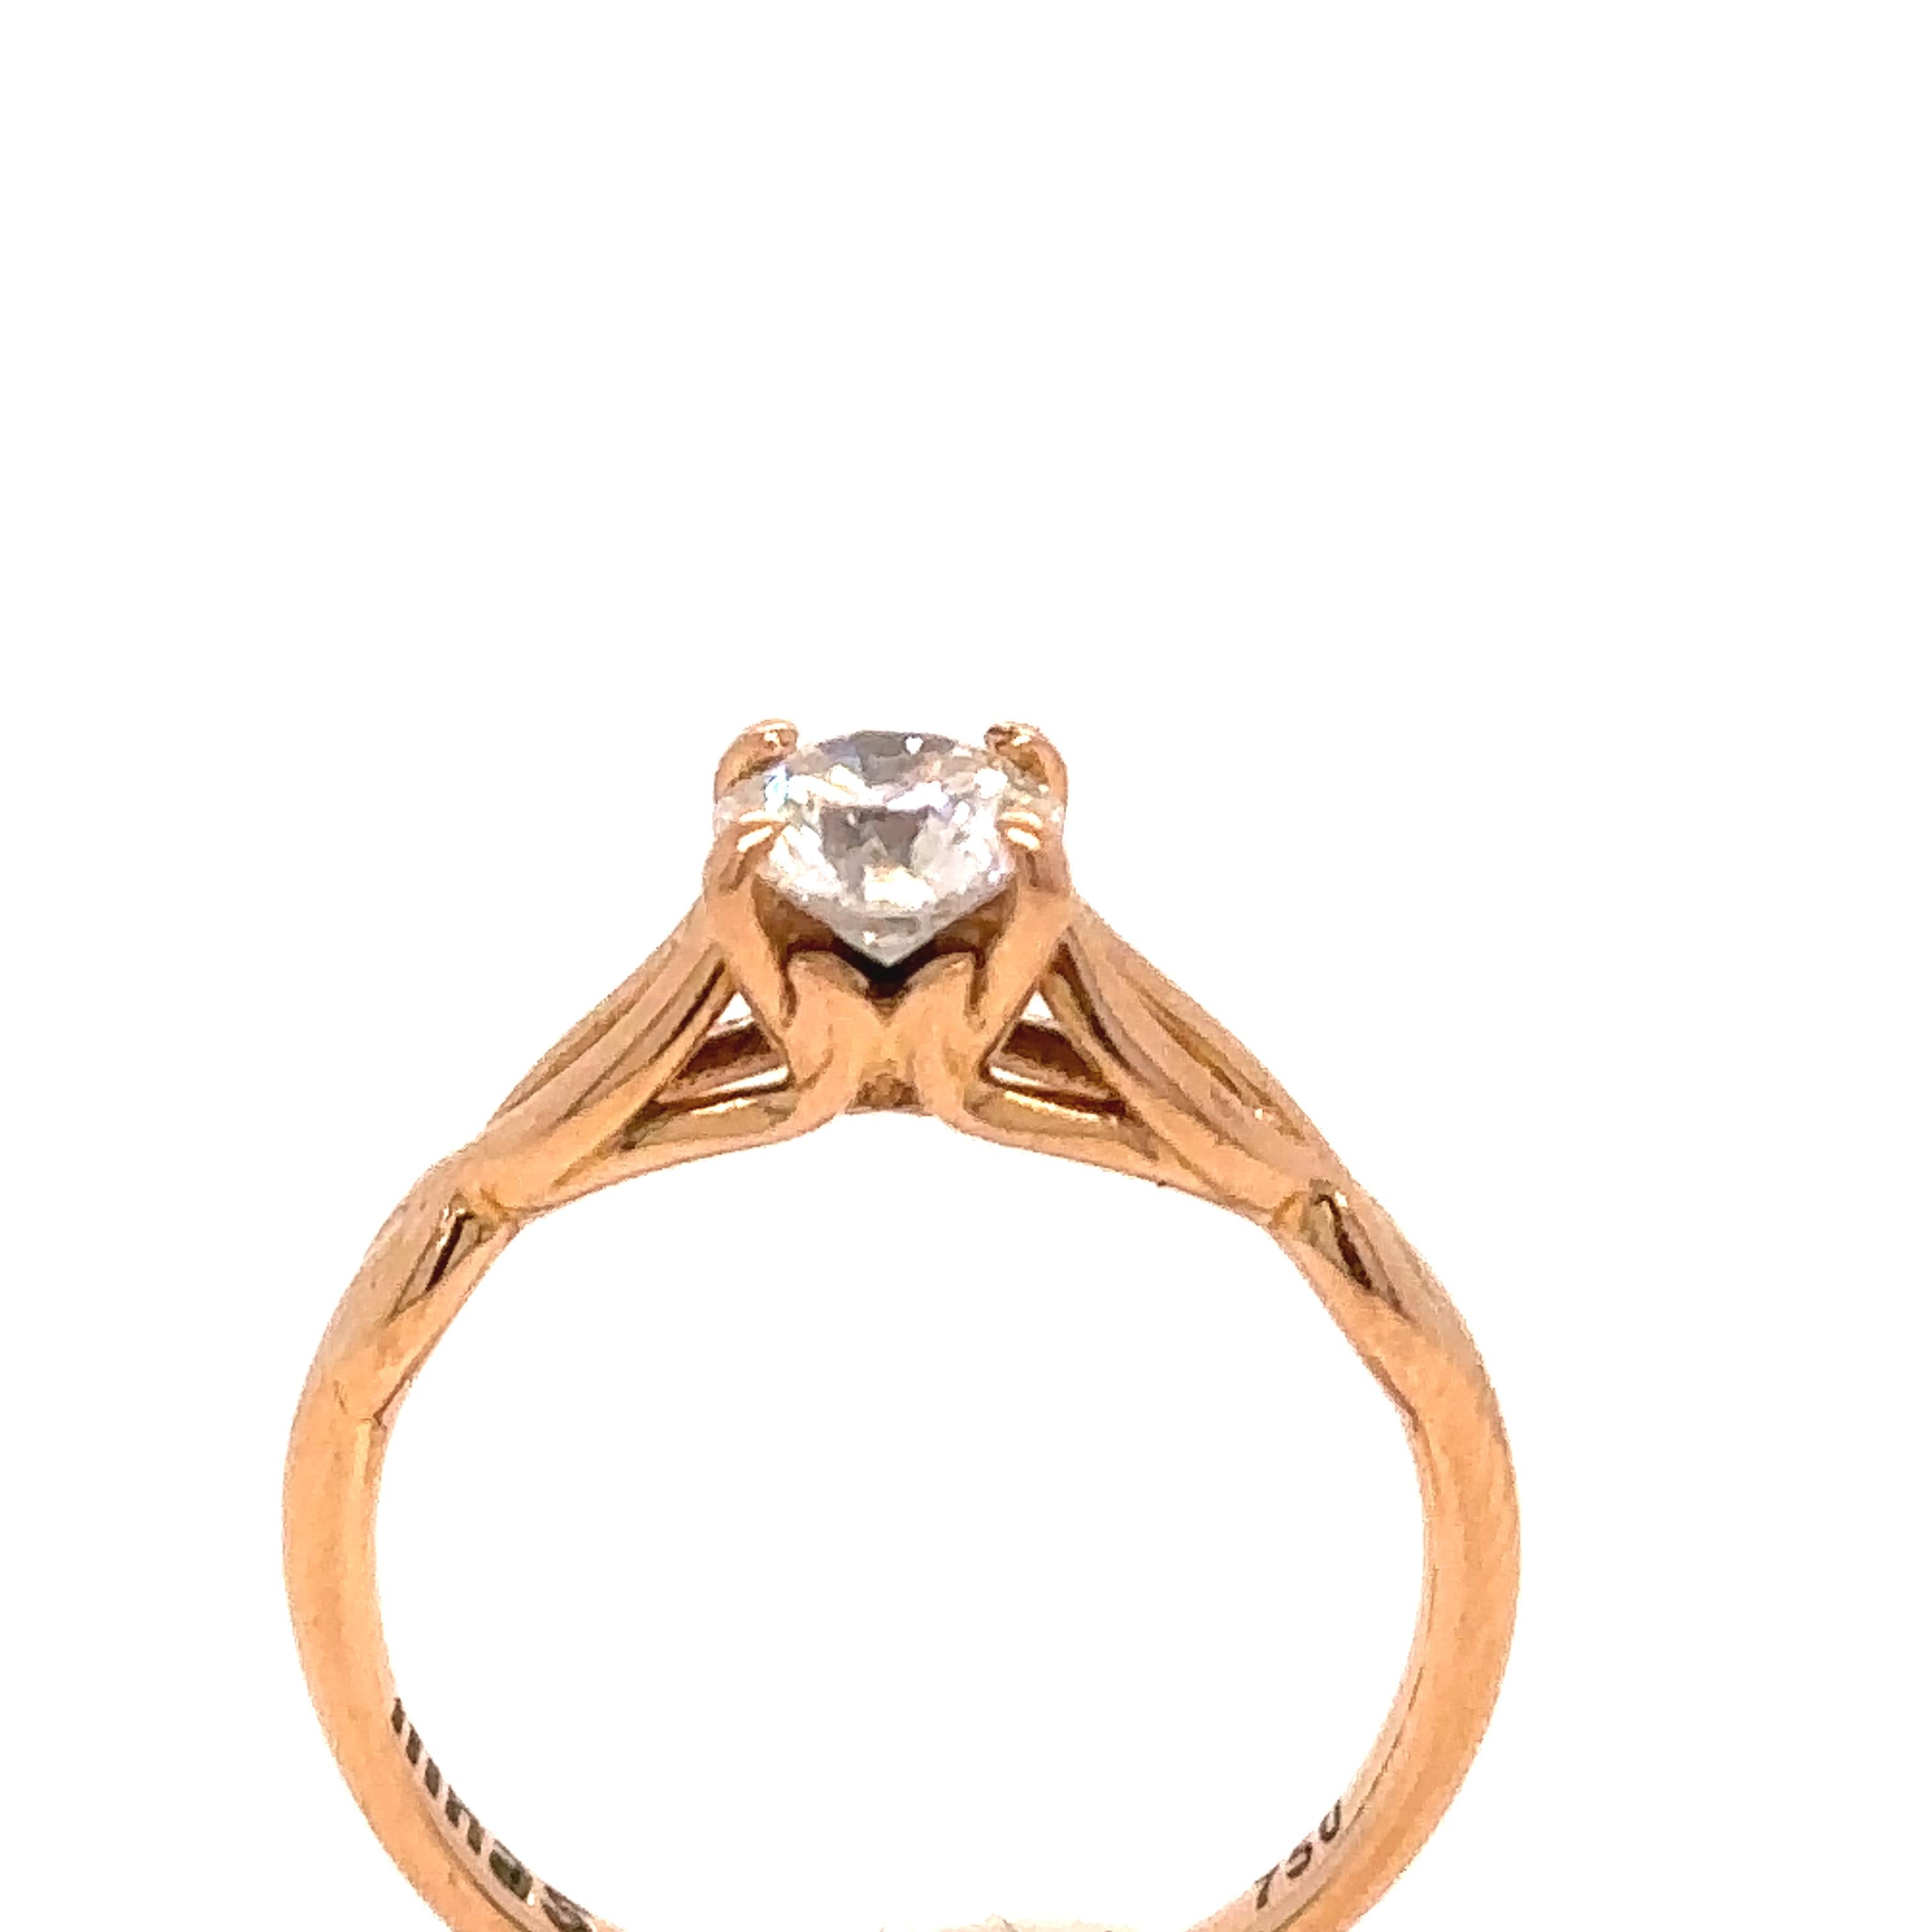 A GIA Diamond Engagement Solitaire Ring made of 18 carat Rose Gold.

Metal: 18ct Rose Gold
Carat: 0.62ct
Colour: F
Clarity: VS1
Cut: Round Brilliant Cut
Weight: N/A
Engravings/Markings: Signed NINAS 750

Size/Measurement: Ring Size M

Current